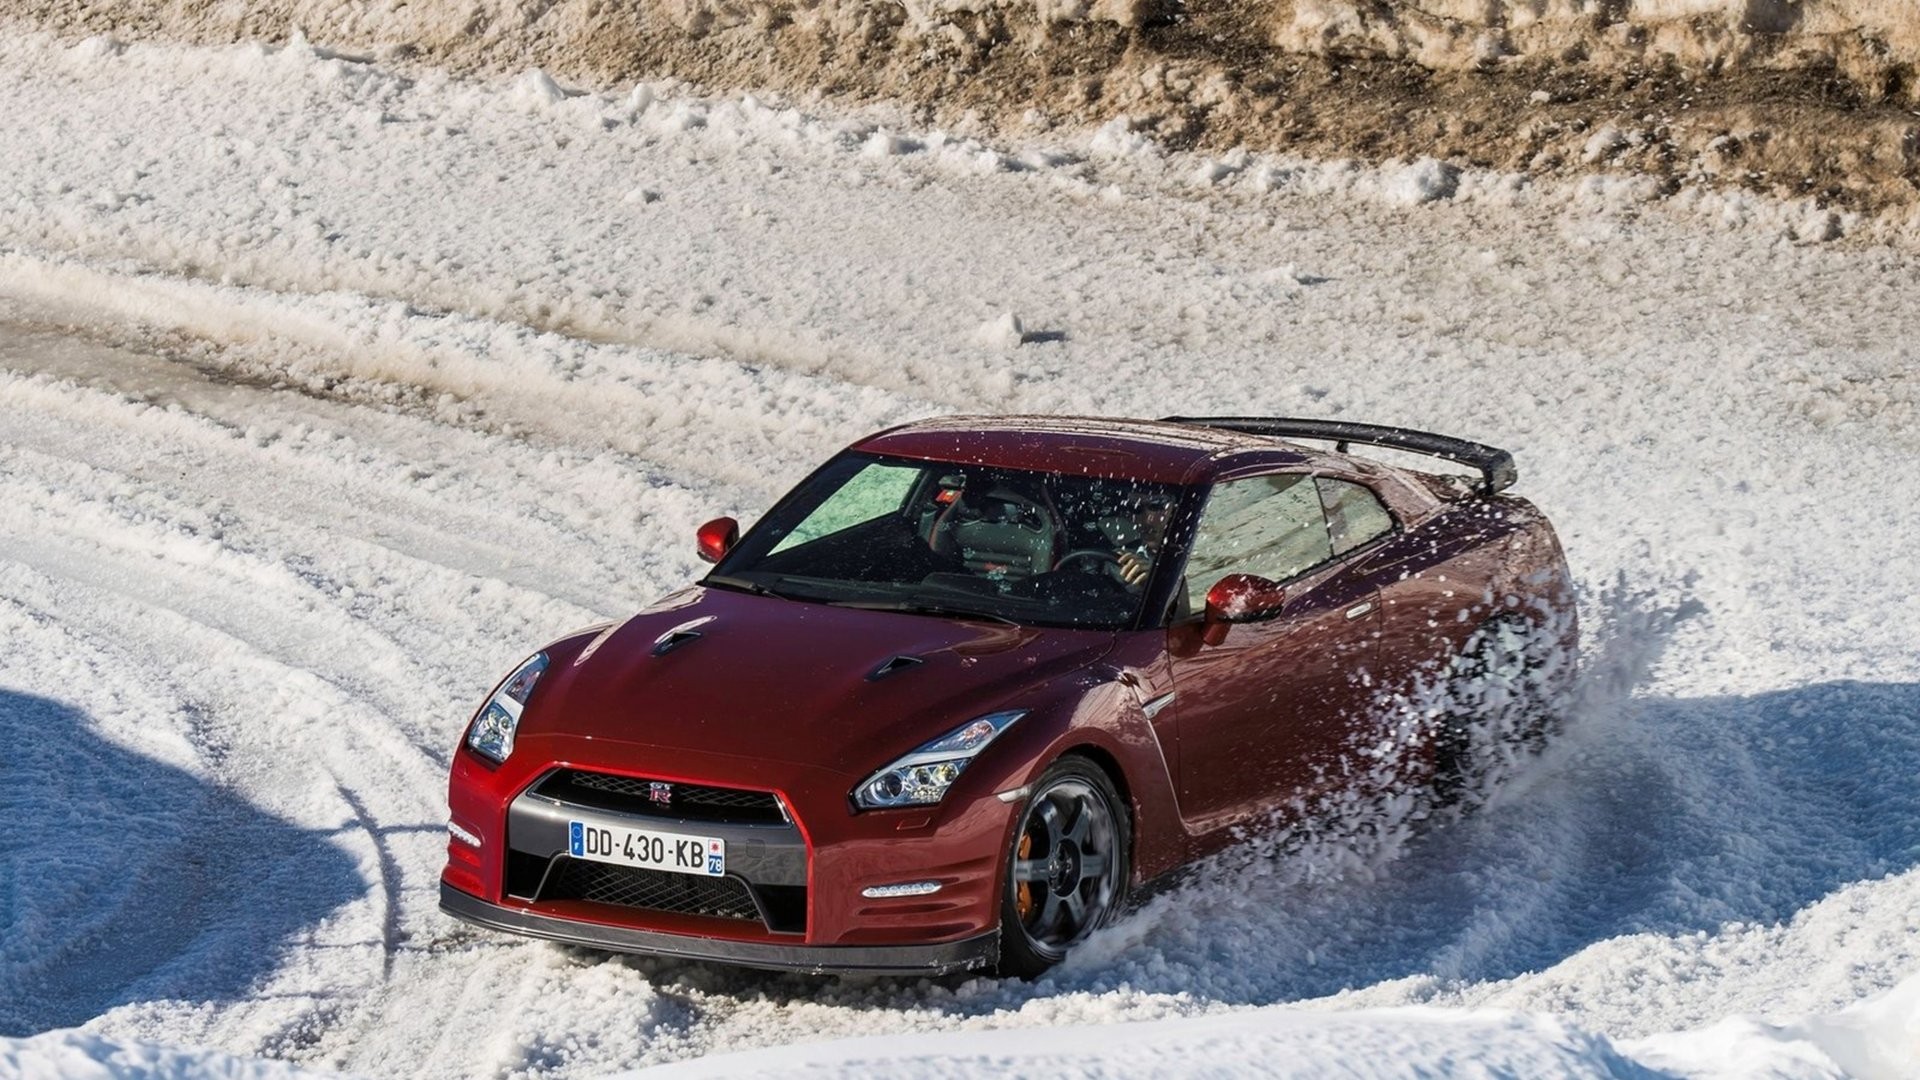 General 1920x1080 Nissan Nissan GT-R winter car snow drift red cars vehicle Japanese cars